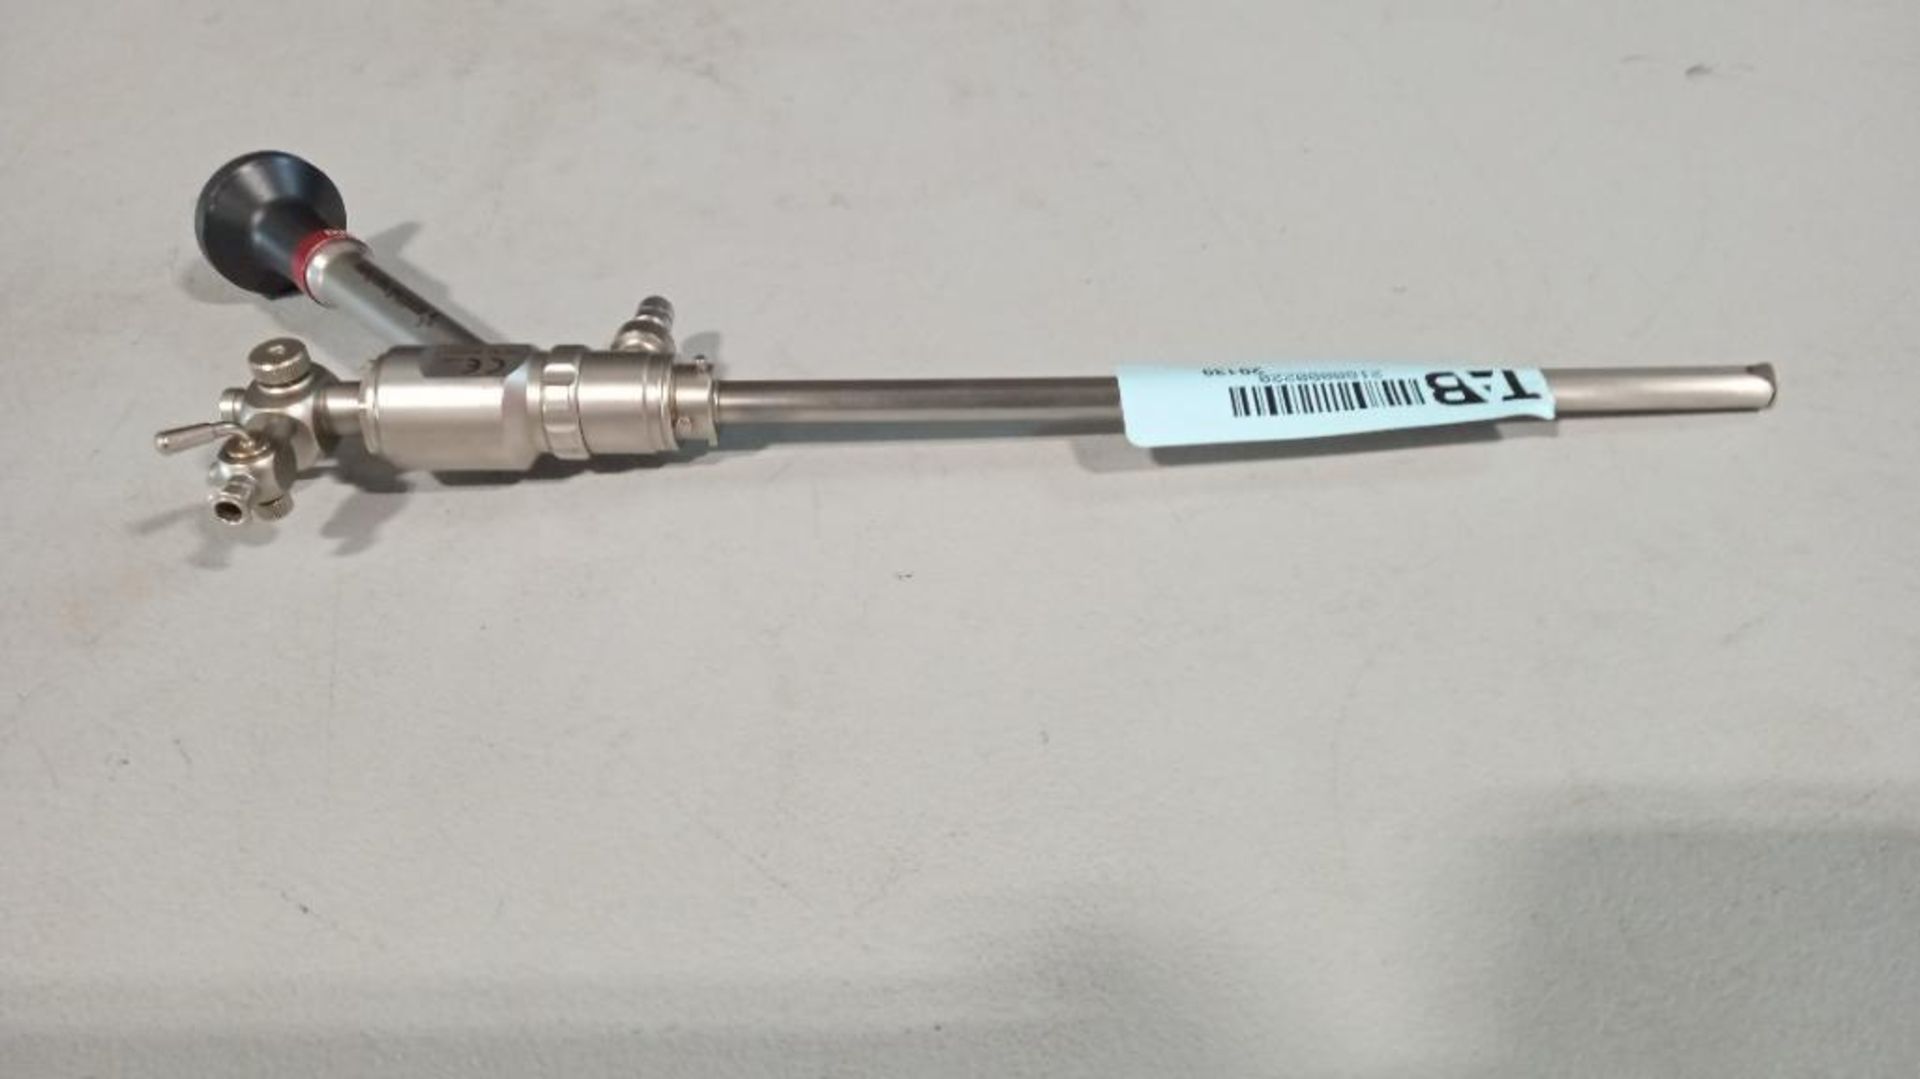 SMITH & NEPHEW 7209208 TRUCLEAR 0 DEGREE AUTOCLAVABLE HYSTEROSCOPE - Image 2 of 3